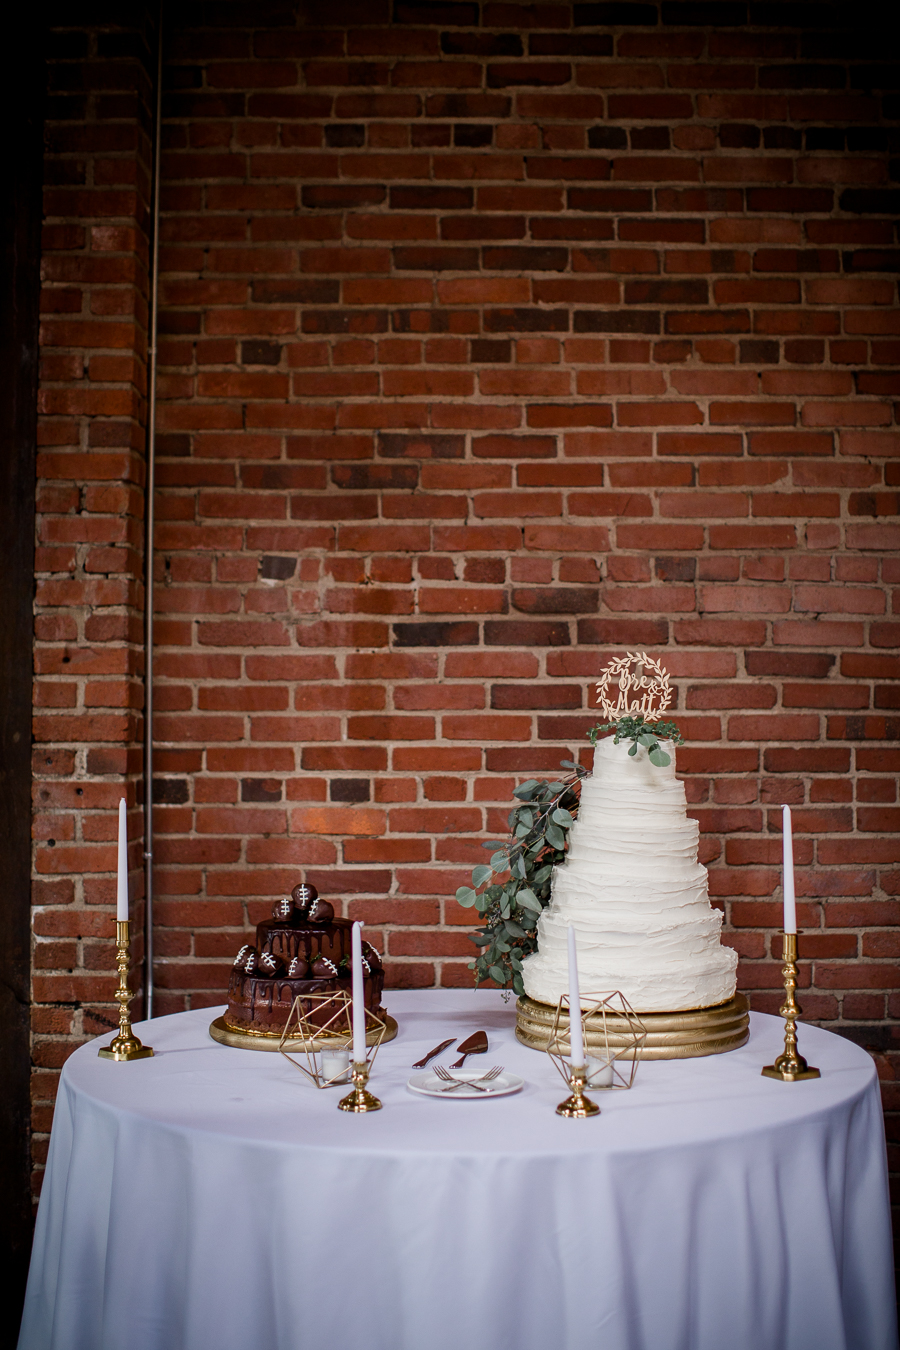 Detail of cakes at this wedding at The Standard by Knoxville Wedding Photographer, Amanda May Photos.